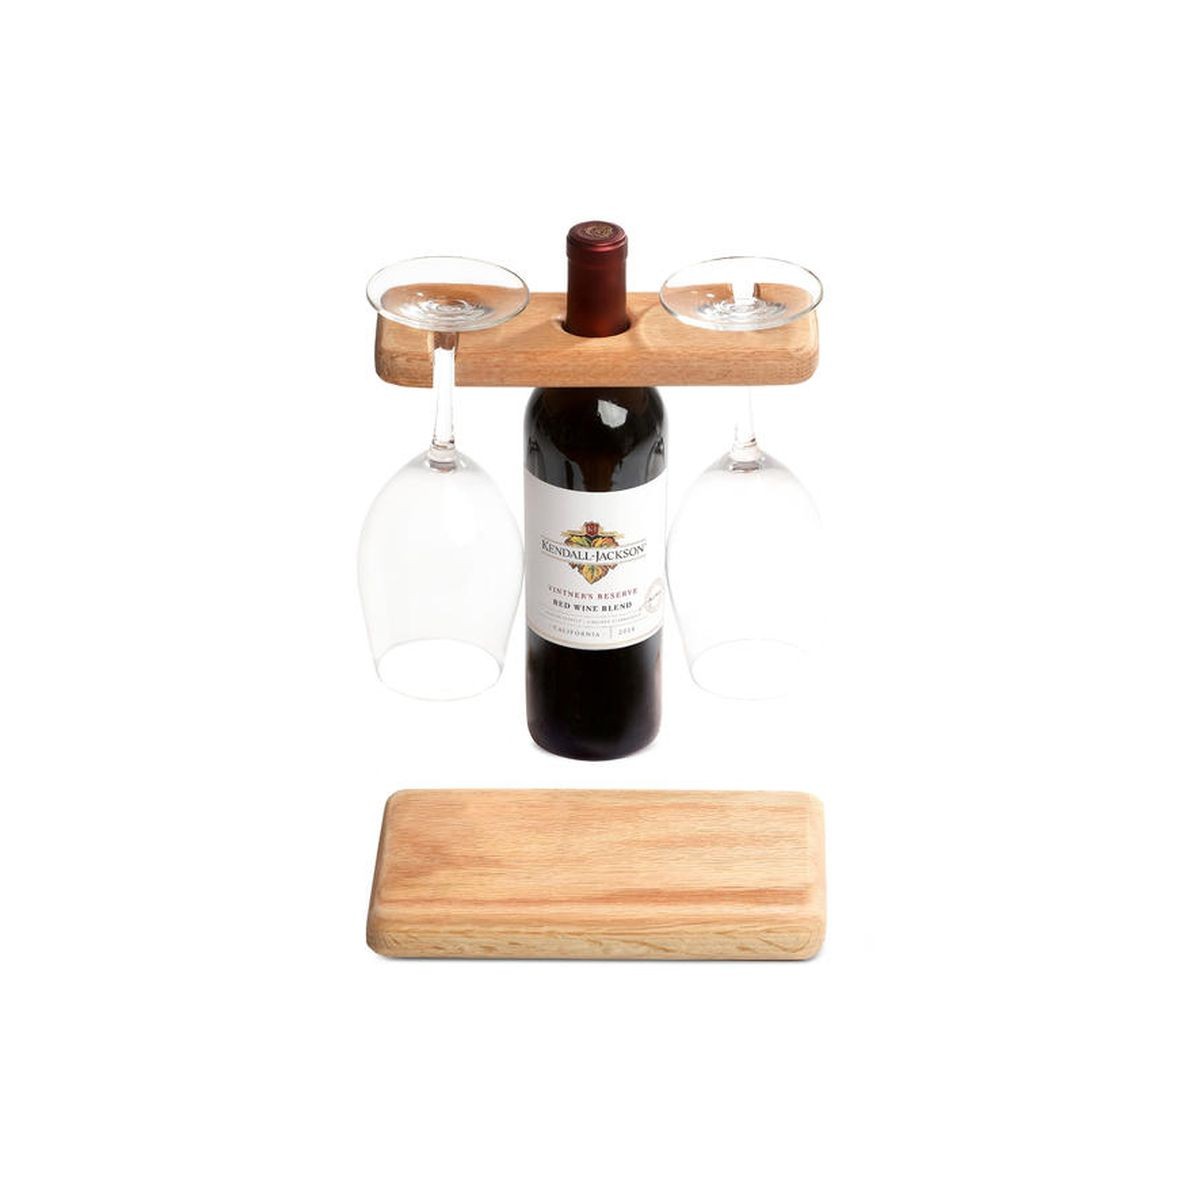 Handmade Wood Chese Board with Wine Bottle and Glasses Holder